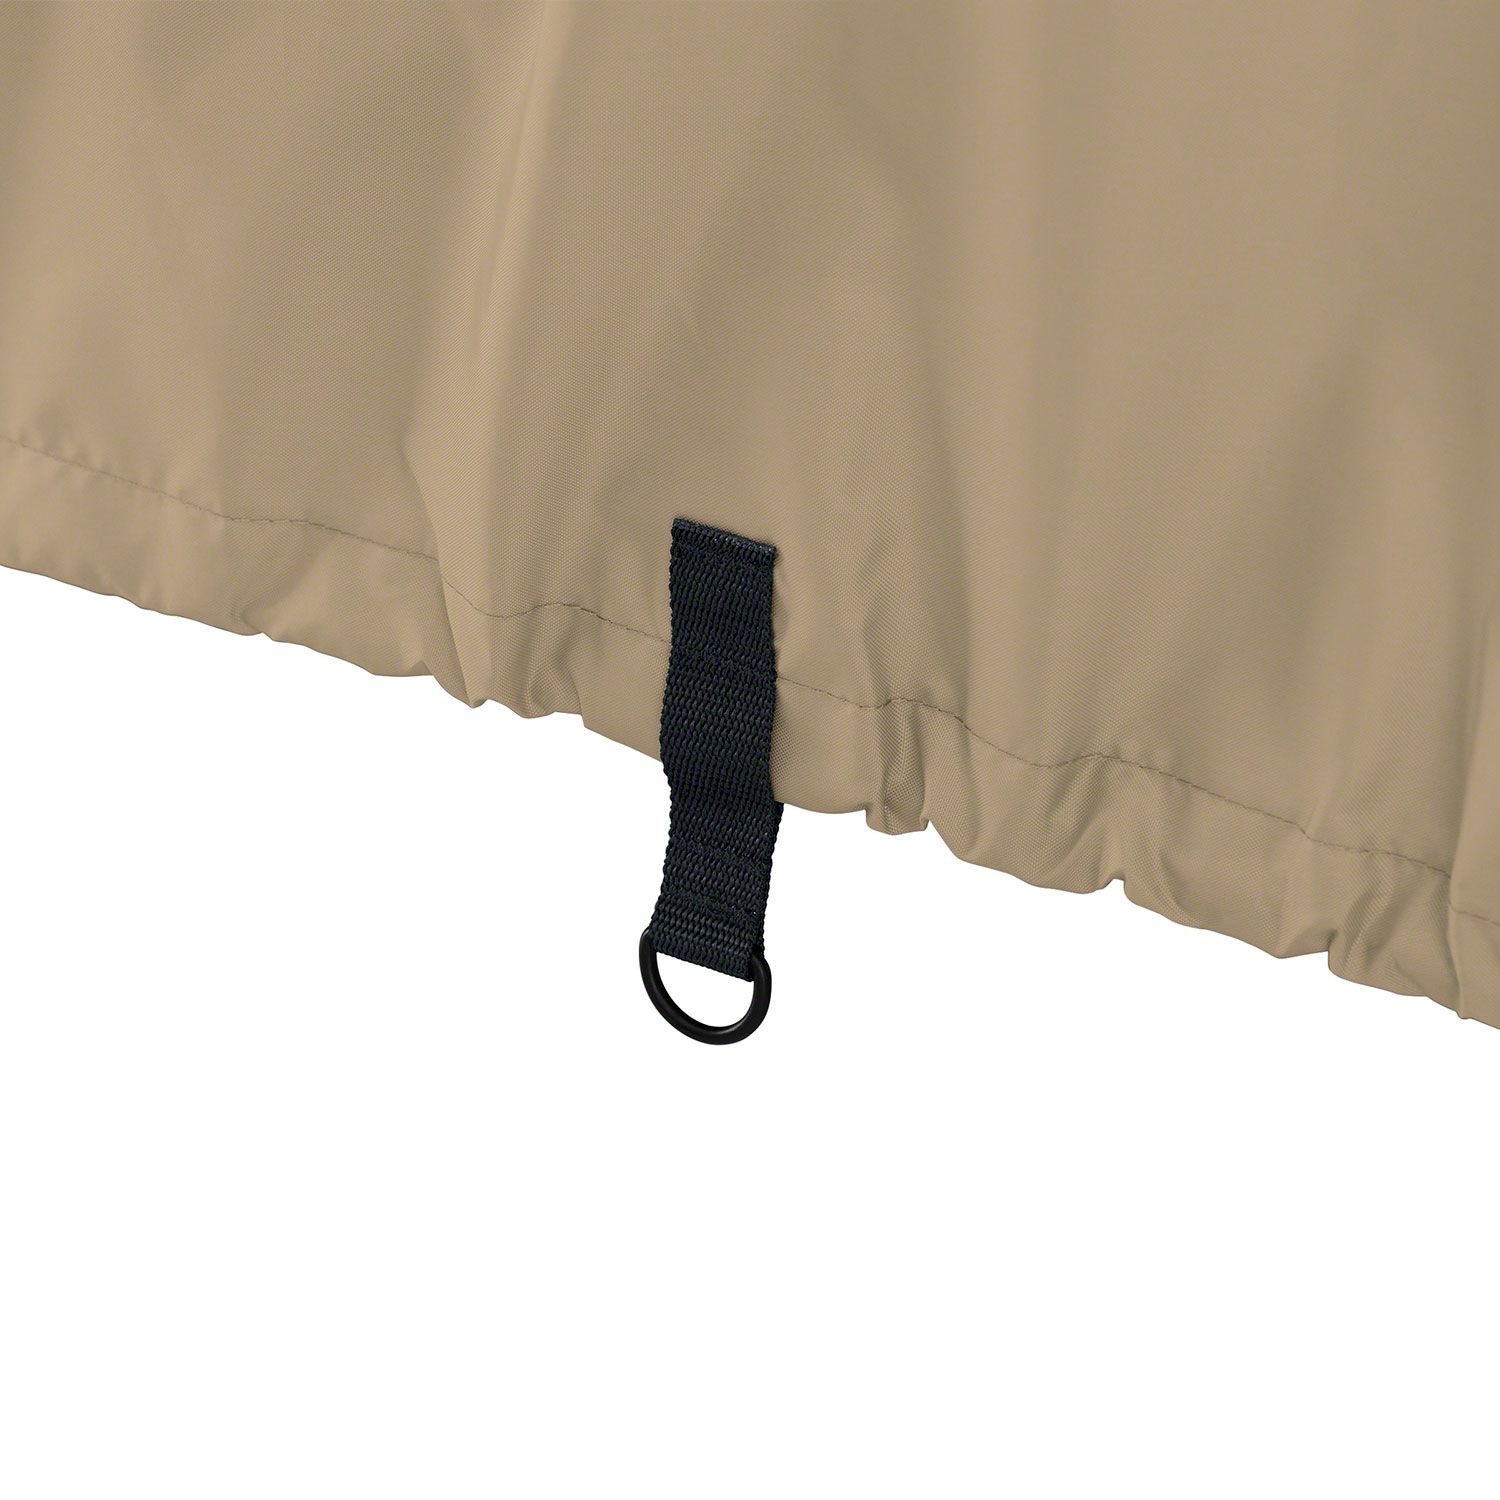 Classic Accessories Fairway Quick-Fit Extra Long Golf Cart Cover - Khaki